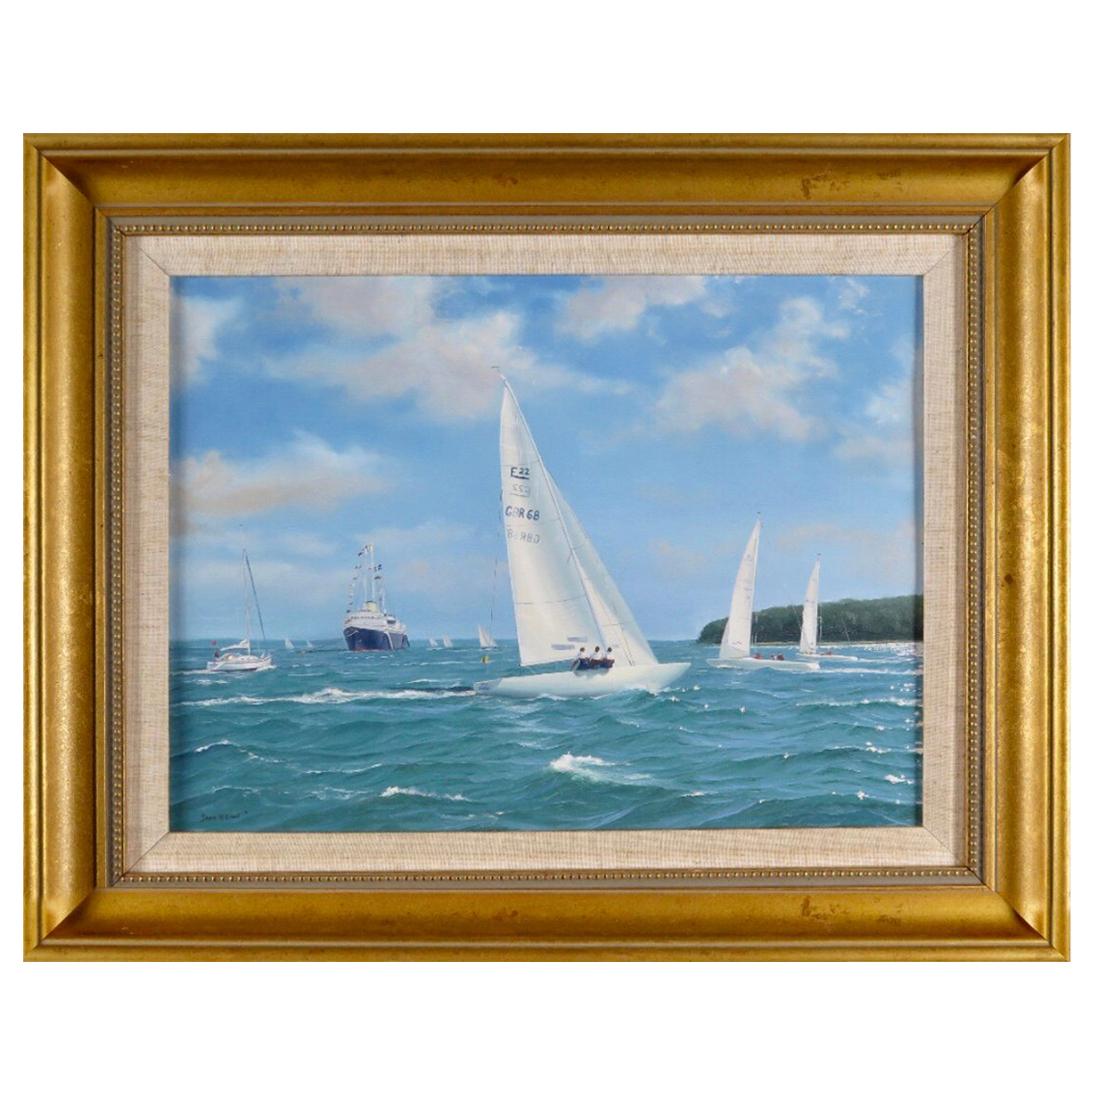 "Yachts Racing" by Shane Michael Couch